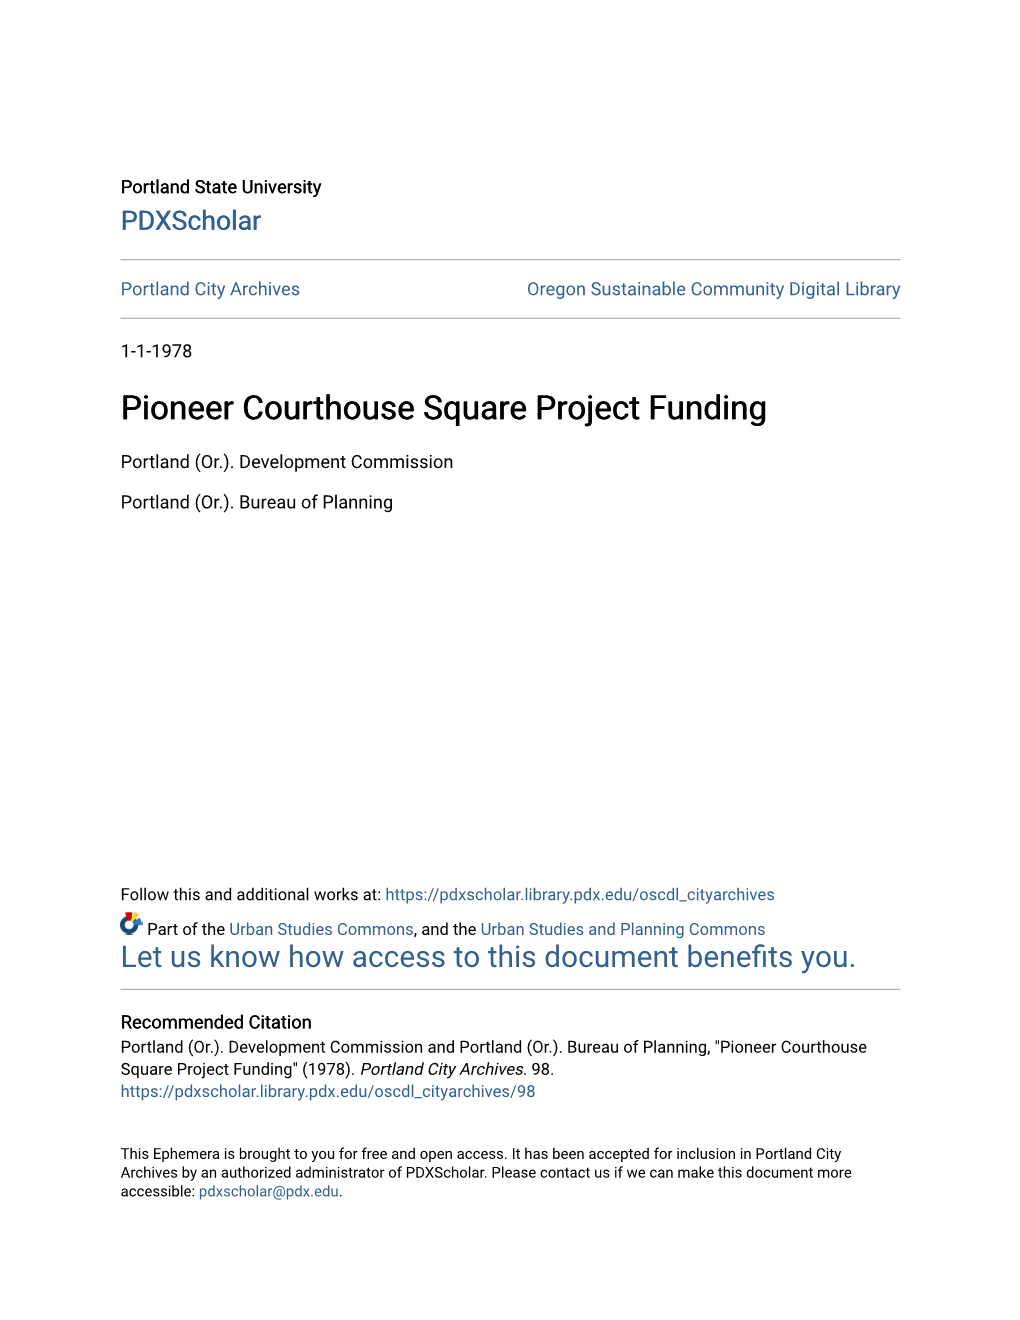 Pioneer Courthouse Square Project Funding